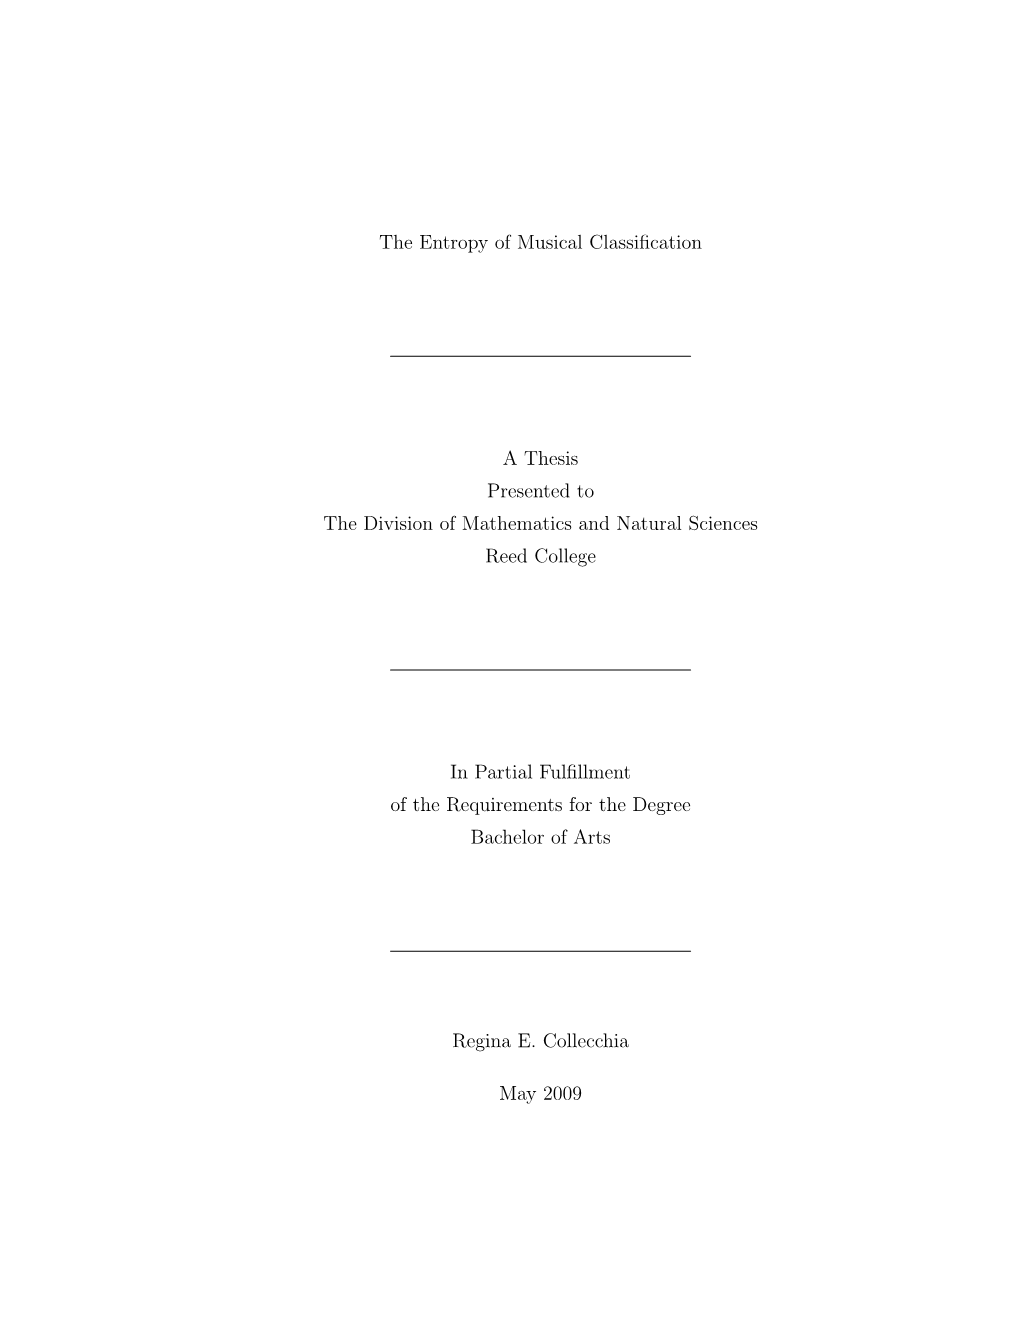 The Entropy of Musical Classification a Thesis Presented to the Division